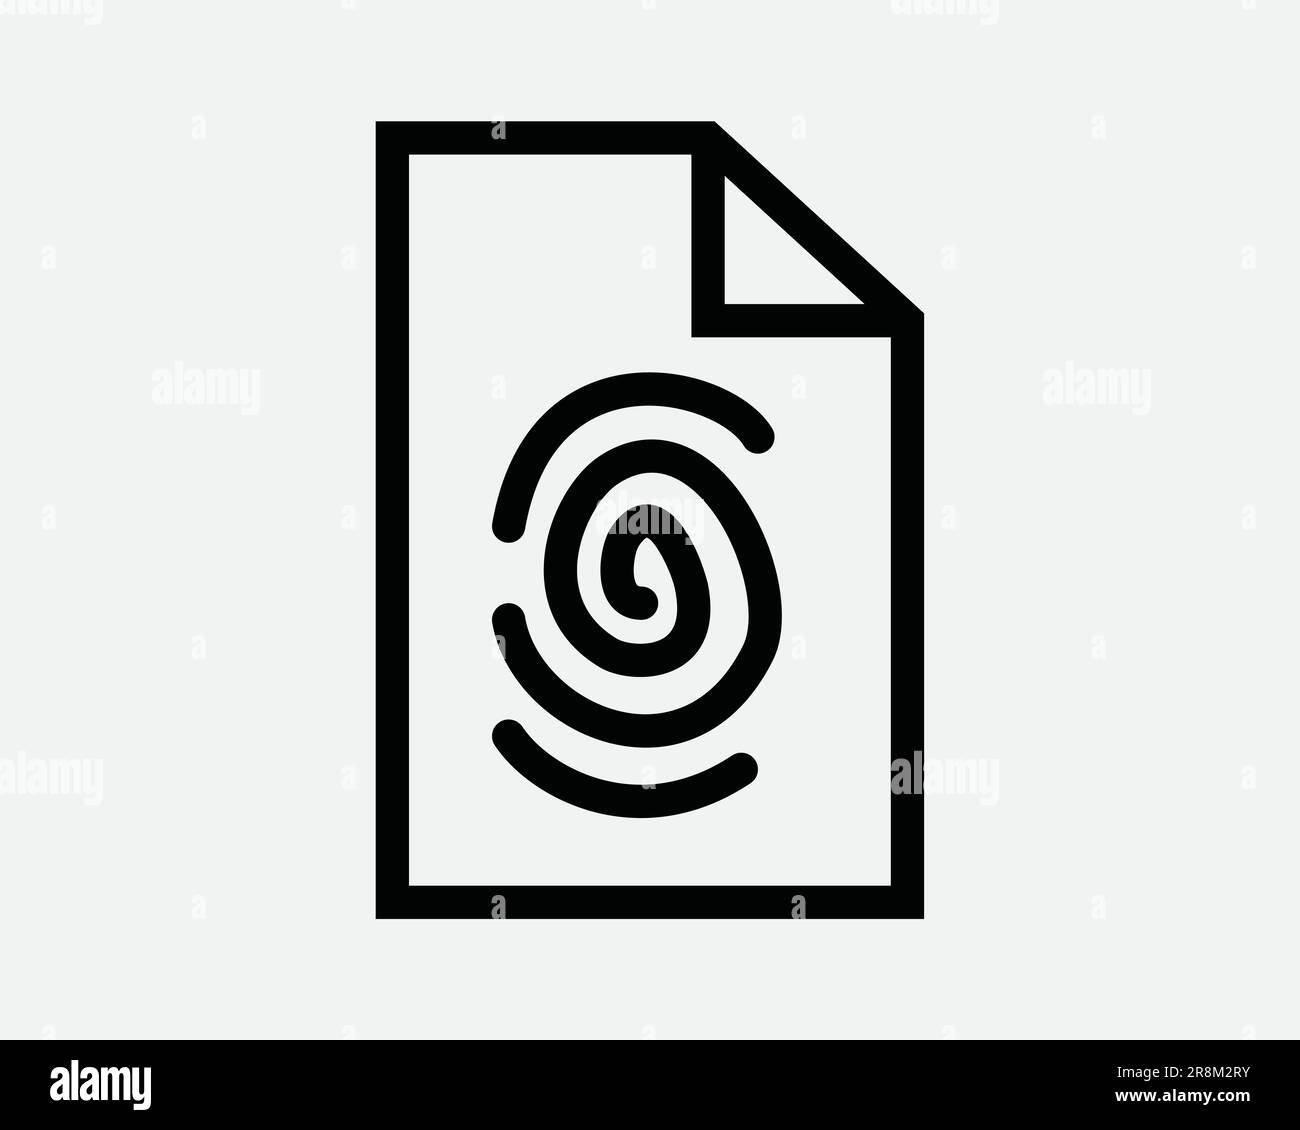 Fingerprint File Icon. Secured File Document Classified Protection Privacy ID Biometric. Black White Sign Symbol Artwork Graphic Clipart EPS Vector Stock Vector